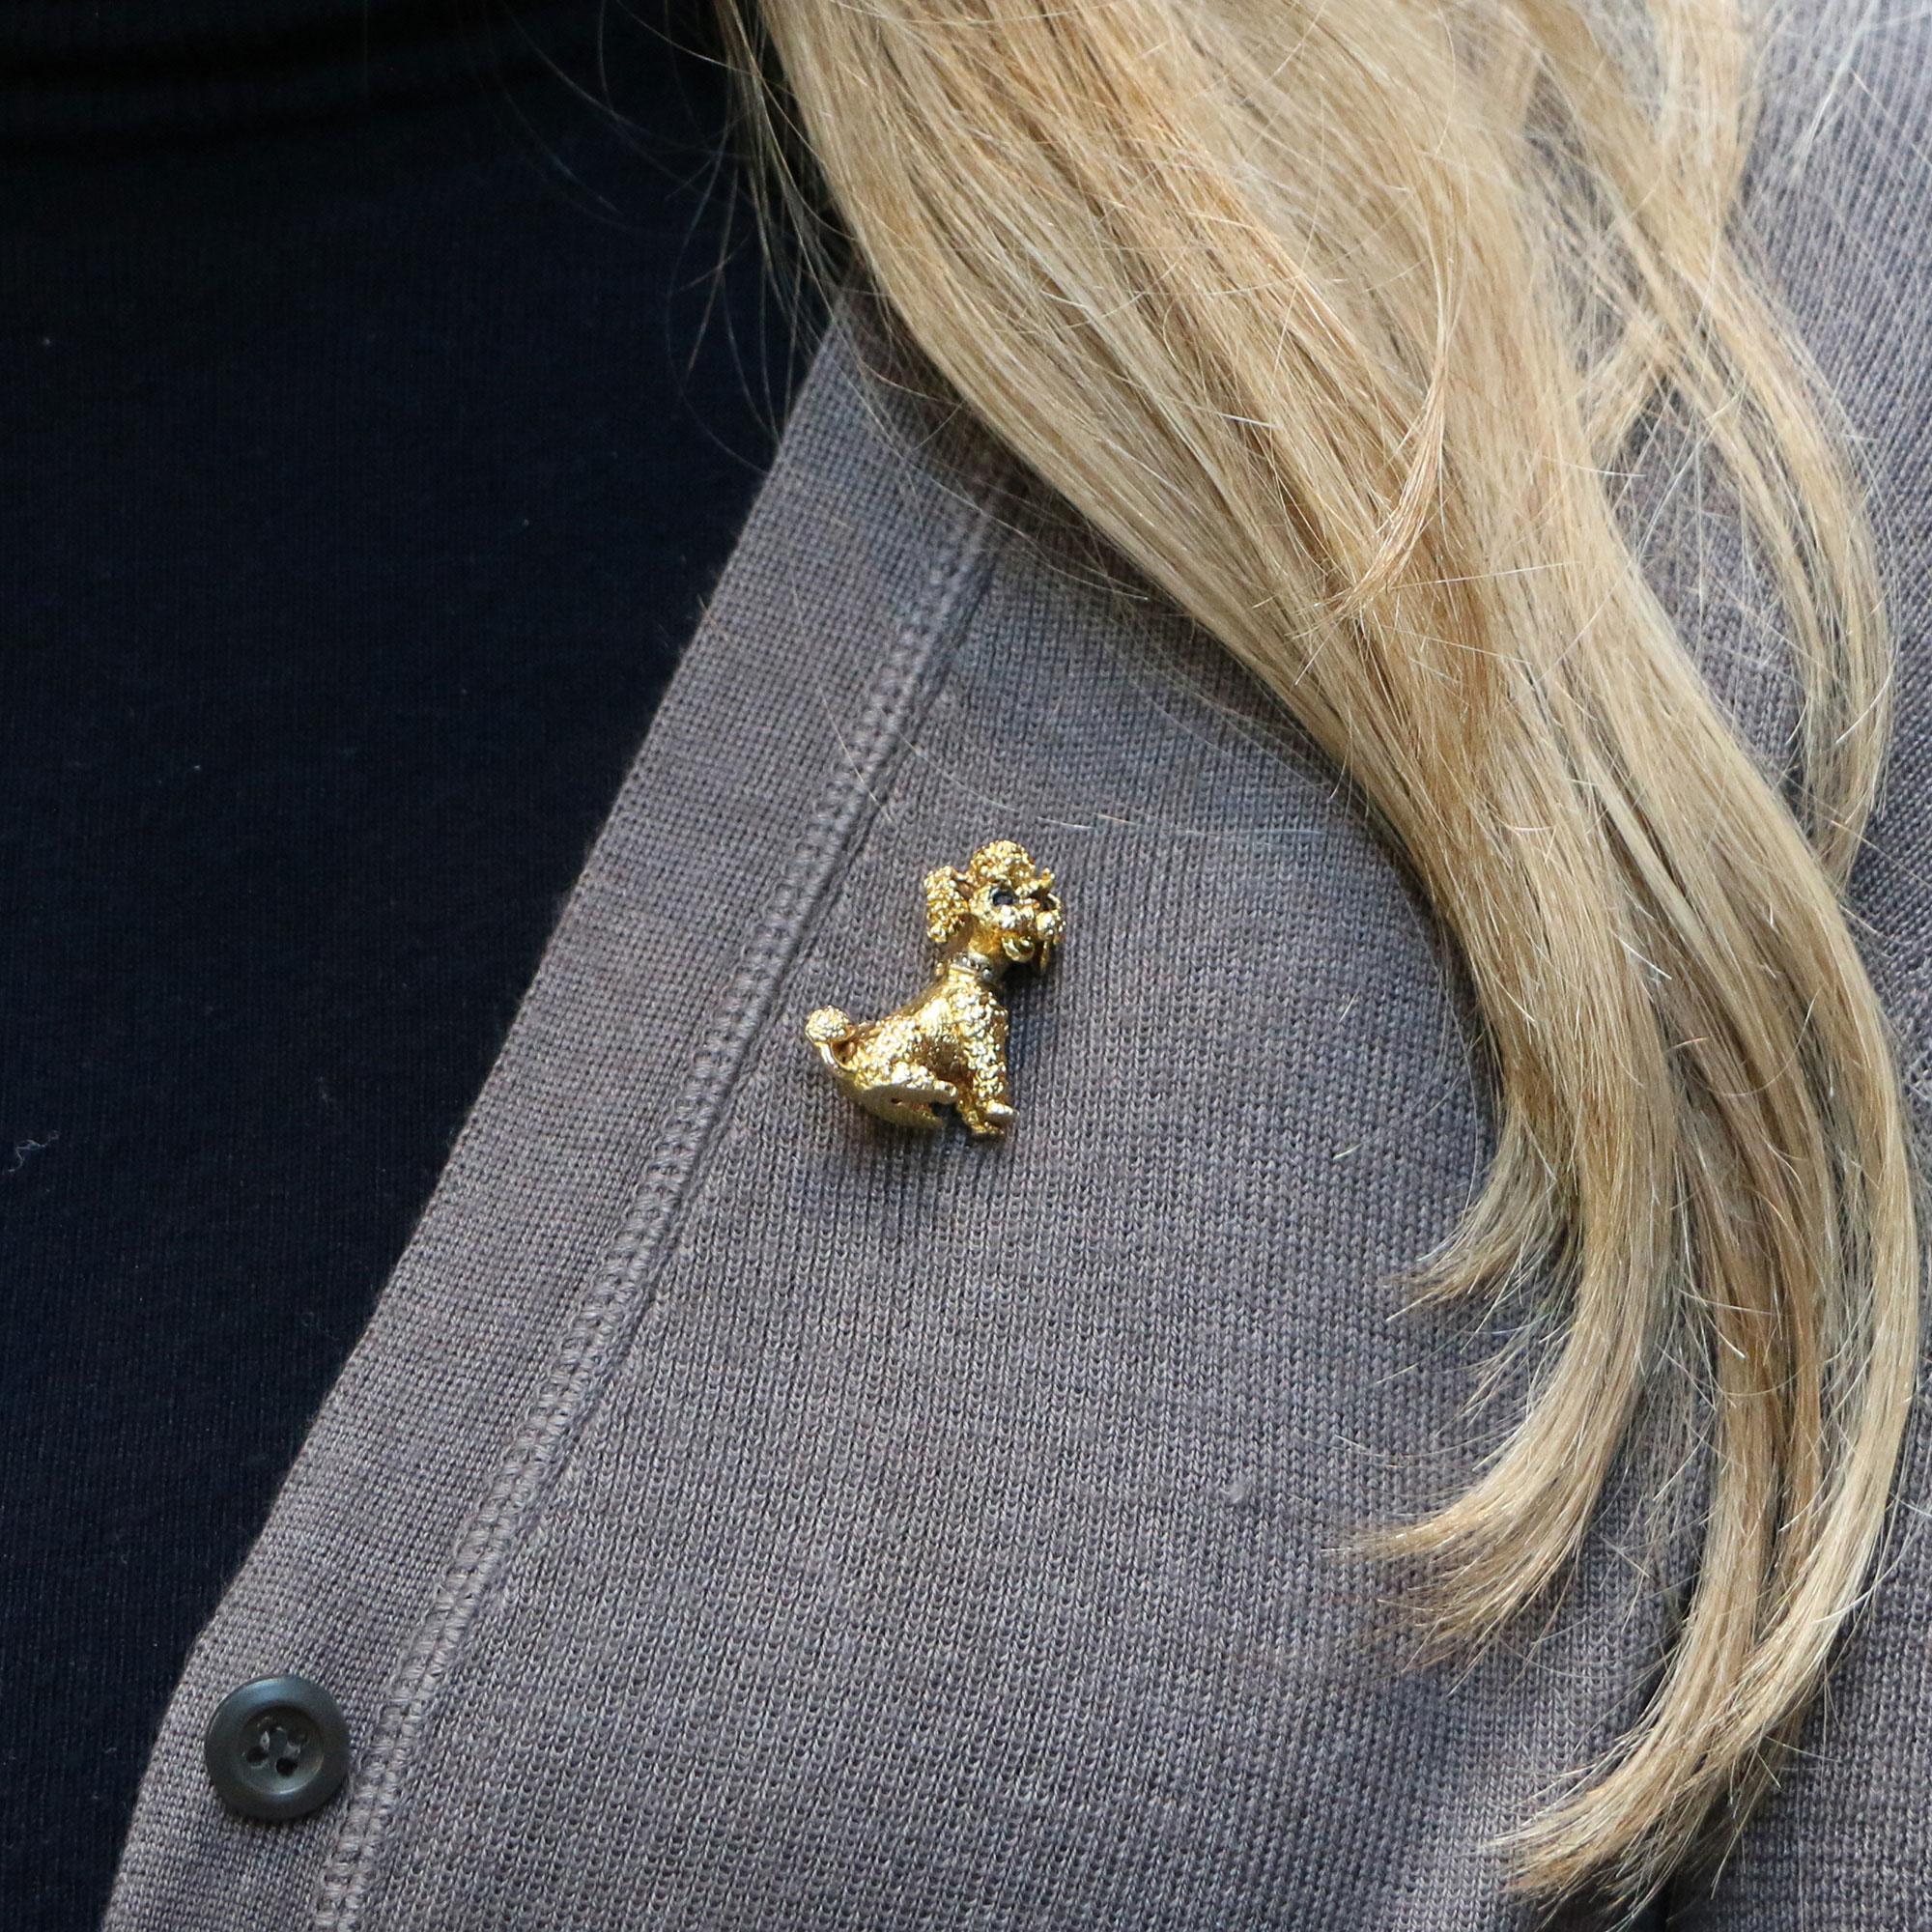 A delightful yellow gold poodle brooch  This useful brooch is exquisitely hand crafted in 9K yellow gold and features textured gold fur, a sparkling collar studded with rose cut diamonds and piercing blue sapphire eyes. It is very easy to wear